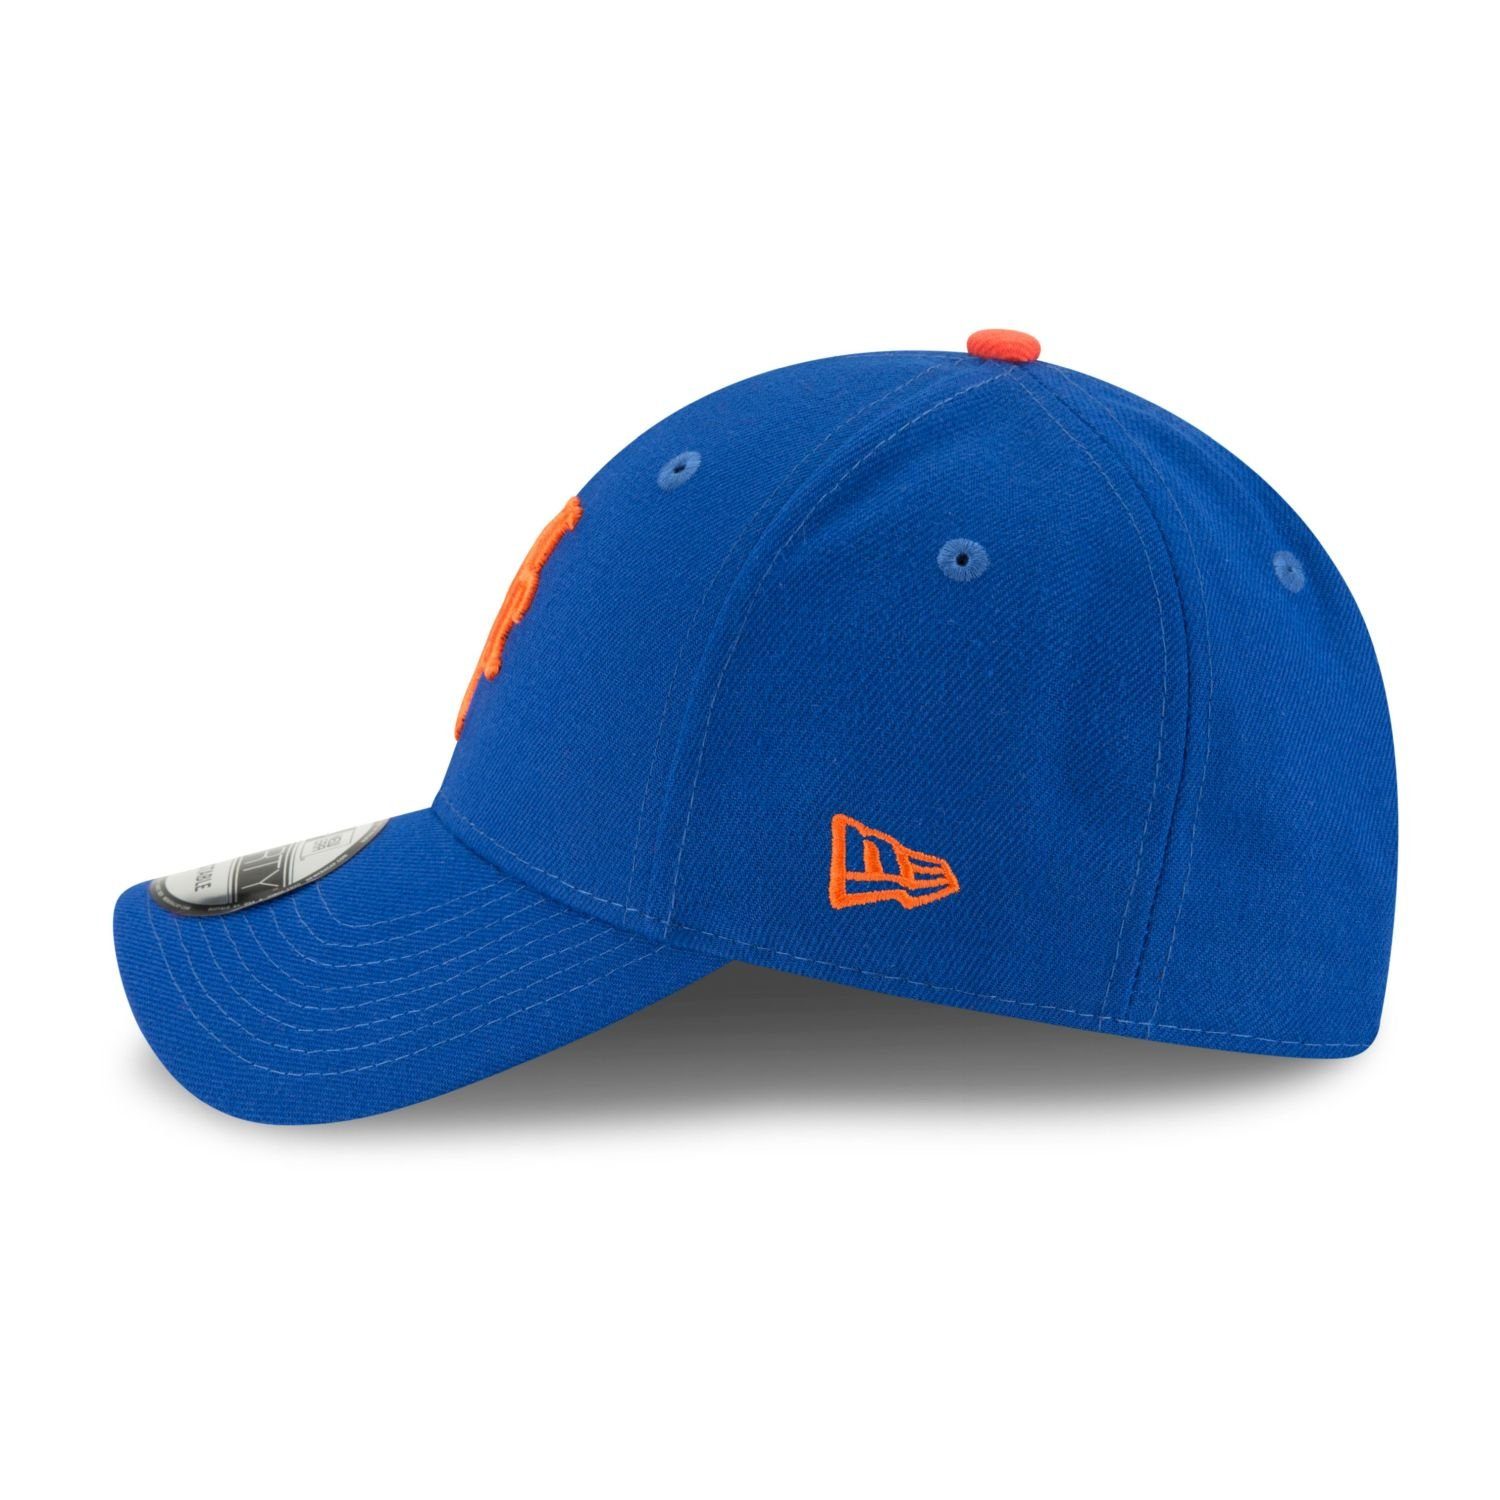 New New Baseball Cap Youth Era Mets LEAGUE York 9Forty